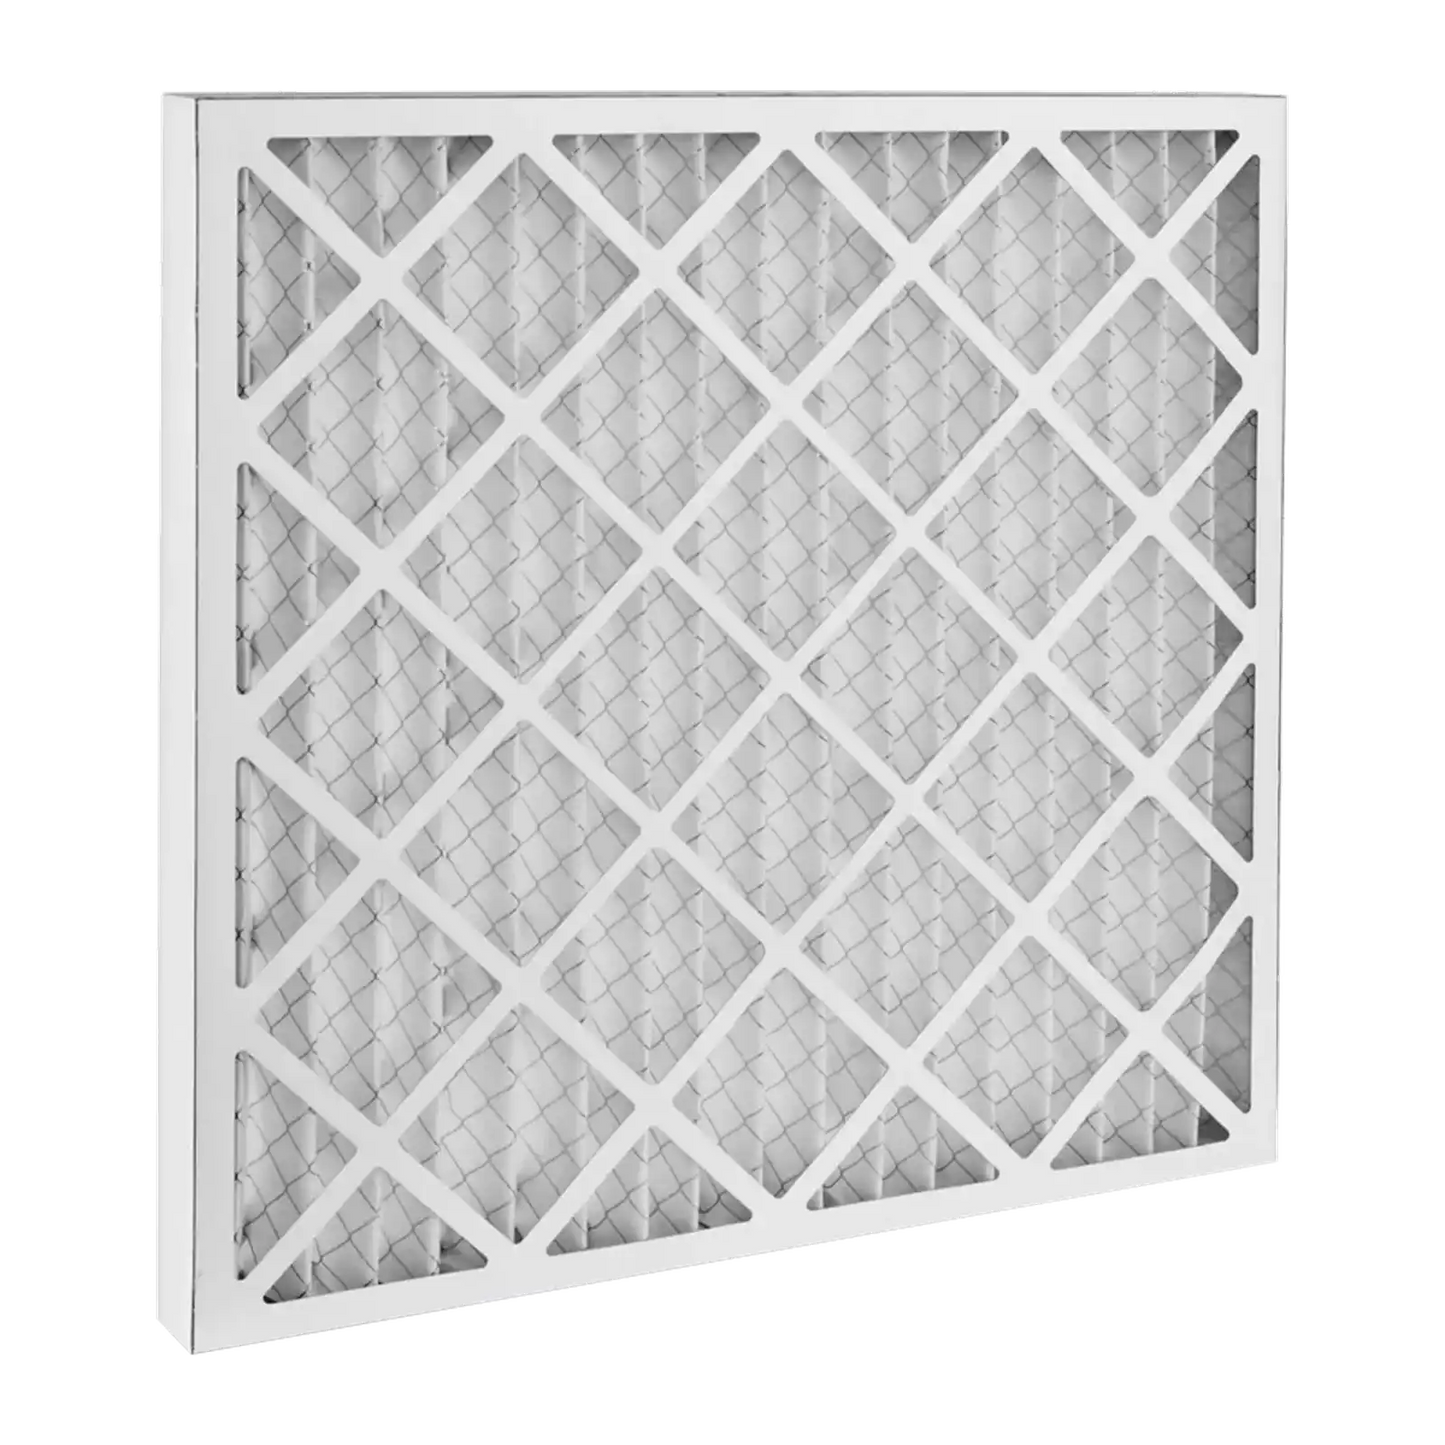 Dafco 16x25x1 Furnace AC Filter - Case of 12